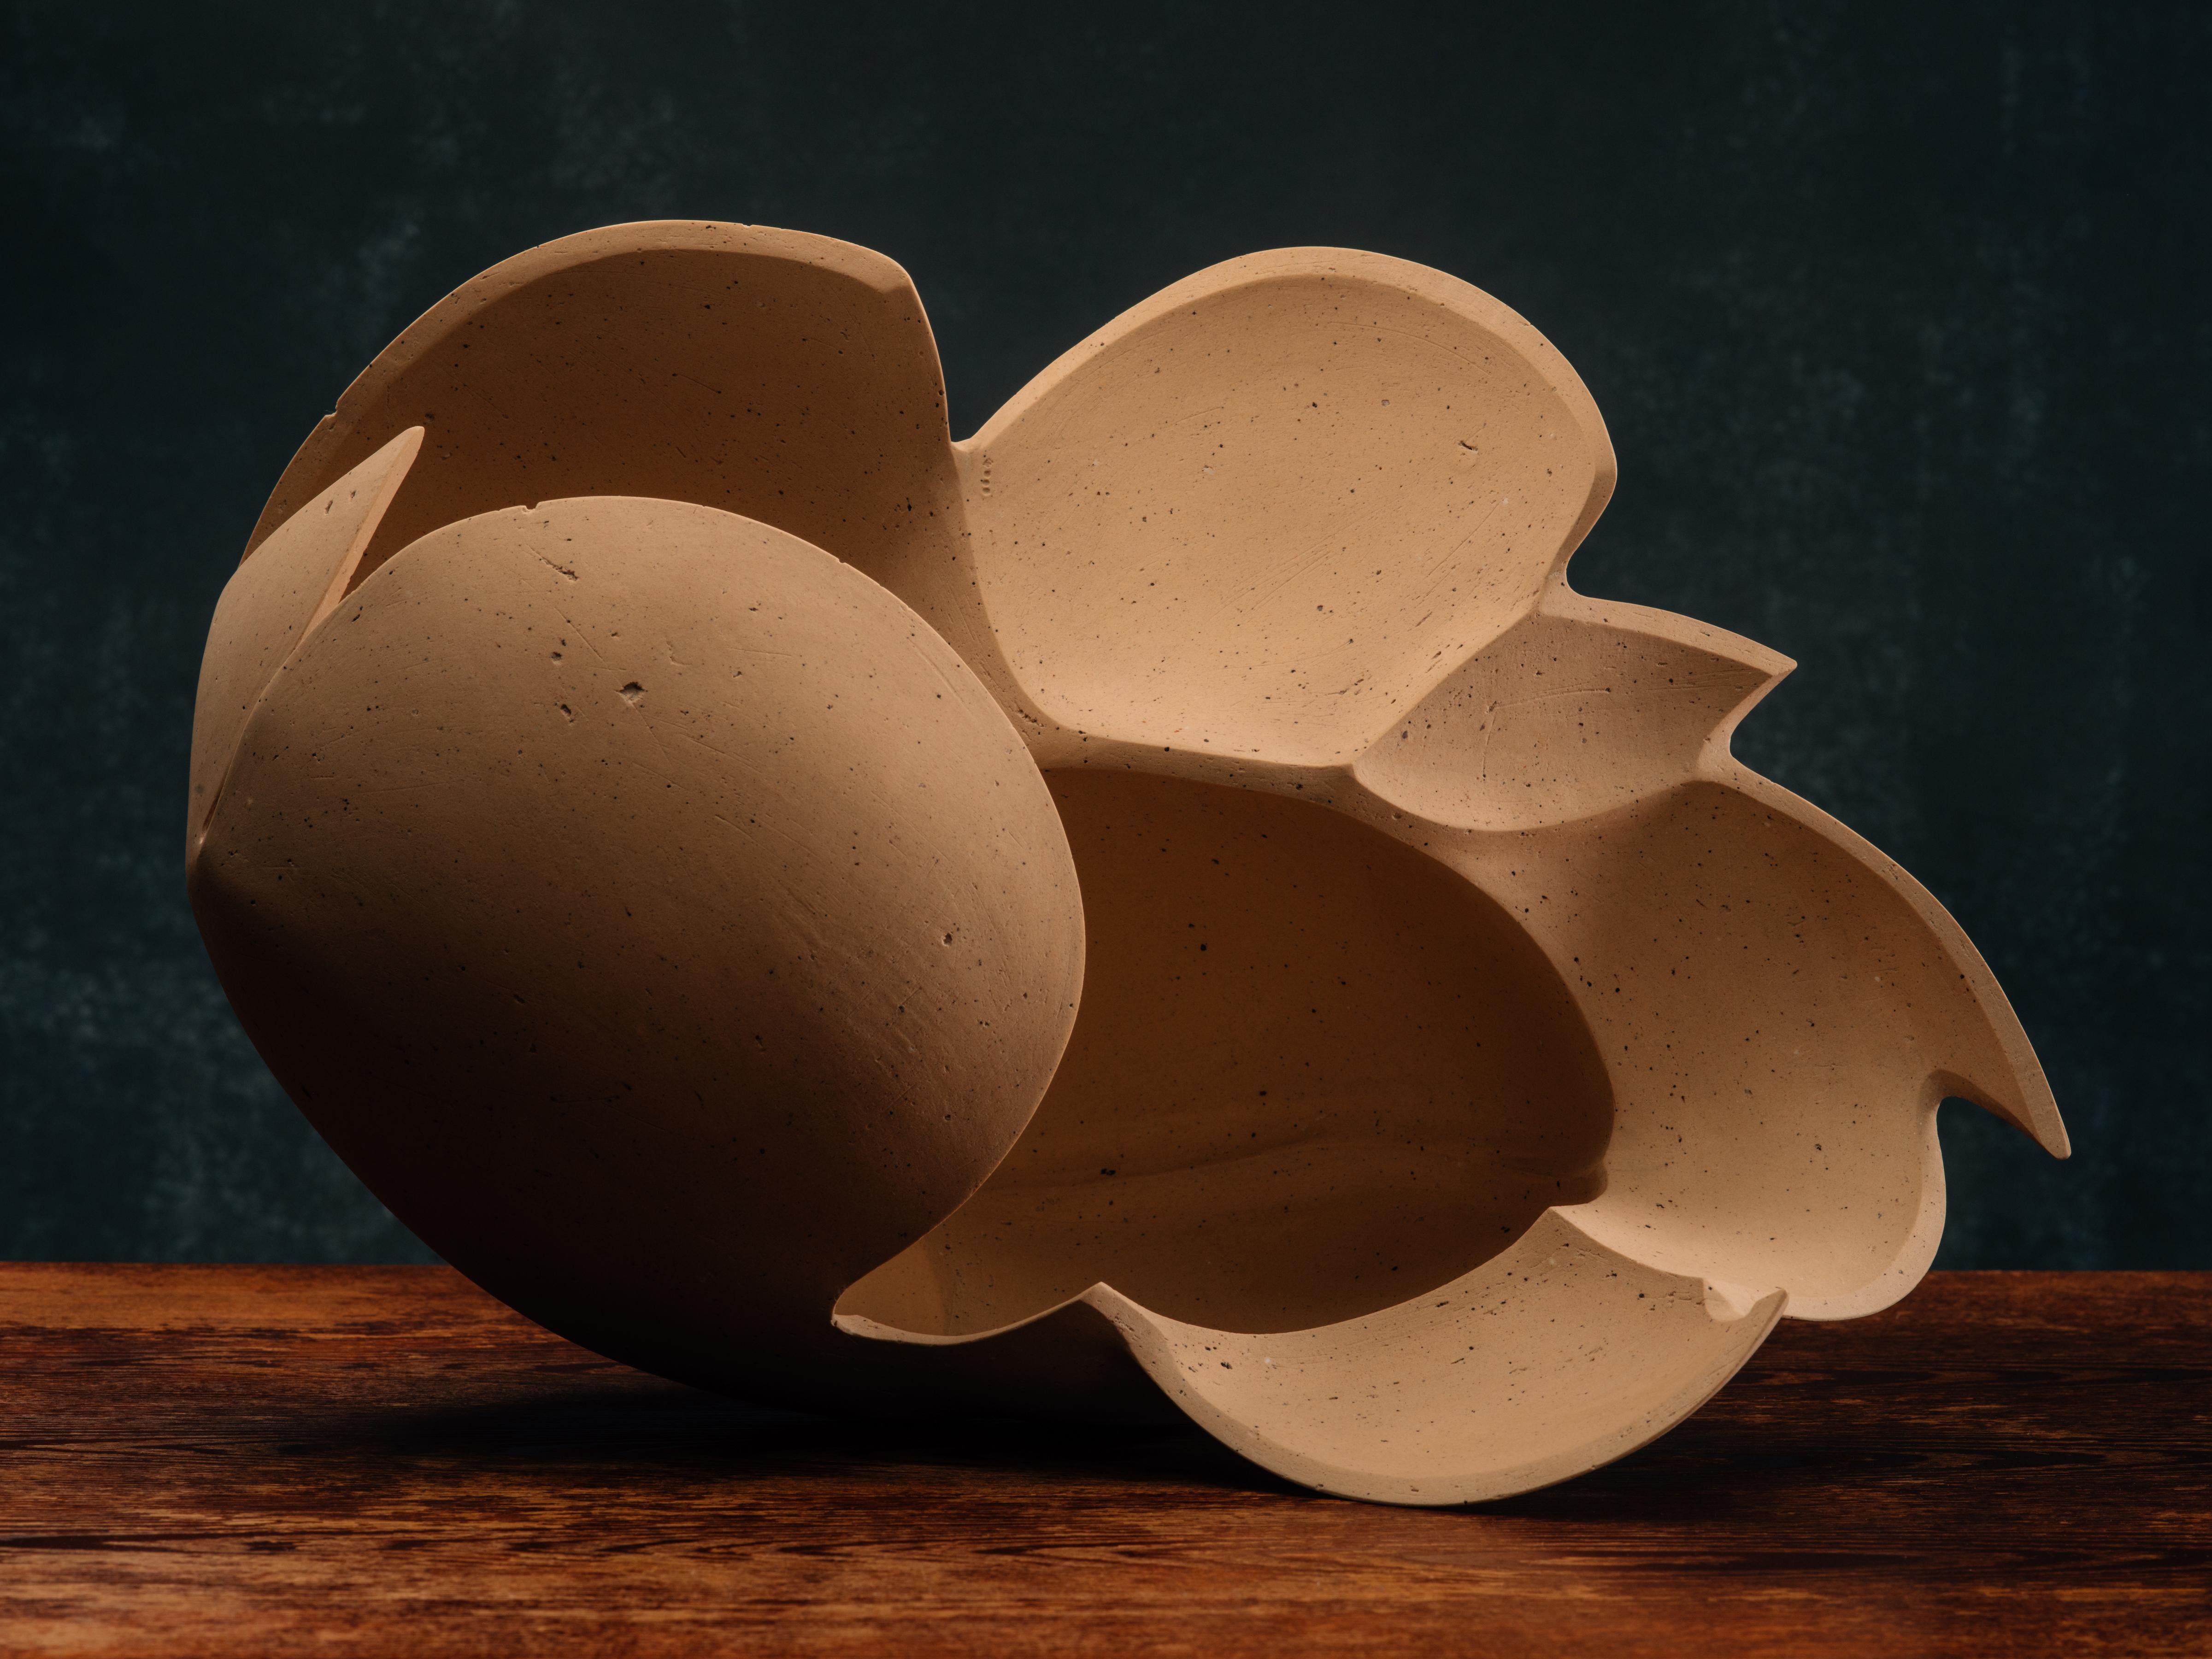 Title: Perianth 03
Year: 2021

Freeform ceramic sculpture made from a blend of porcelaneous and stoneware clays hand-collected by the artist in Minnesota. Its surface is hand-polished with diamond sandpaper to render a matte finish. Signed with